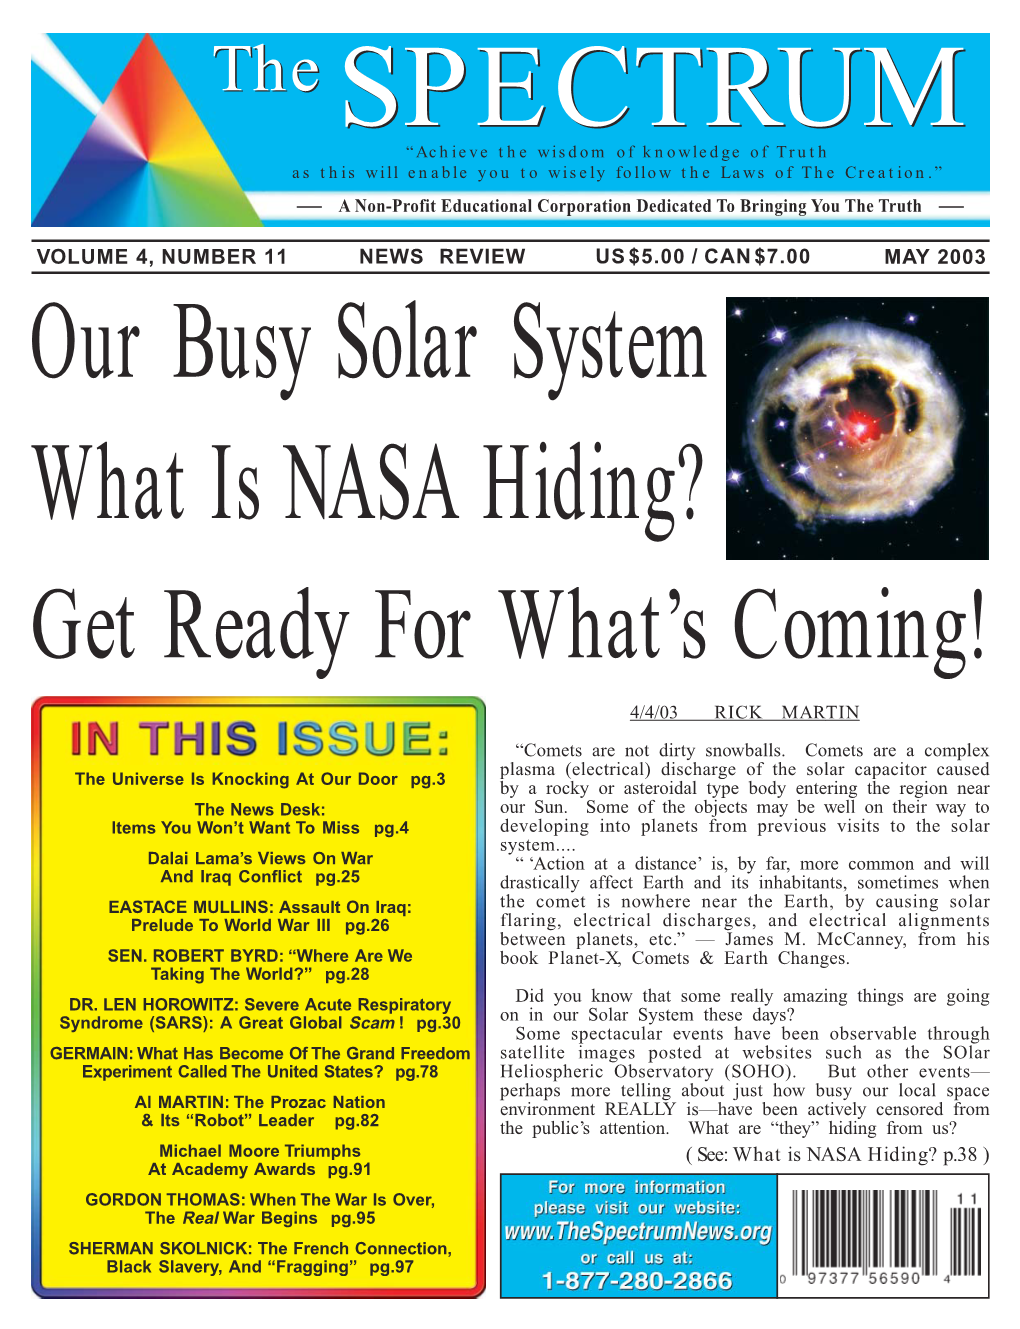 What Is NASA Hiding? Our Busy Solar System